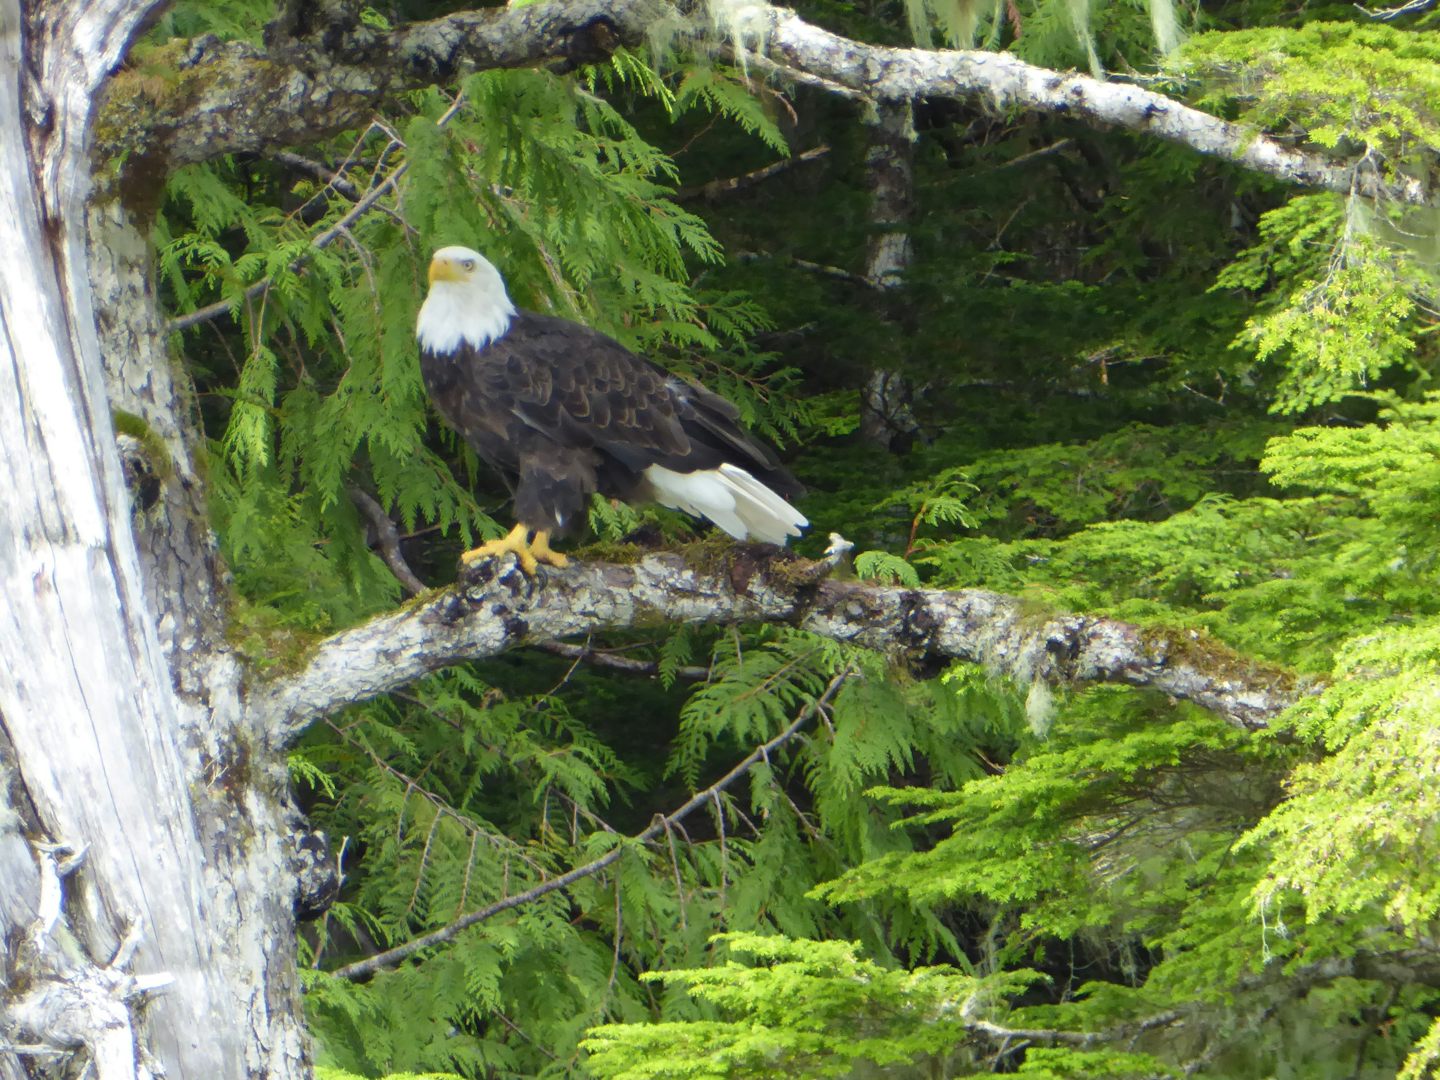 Rare to see wild life but here's a bald eagle, using my zoom lens from